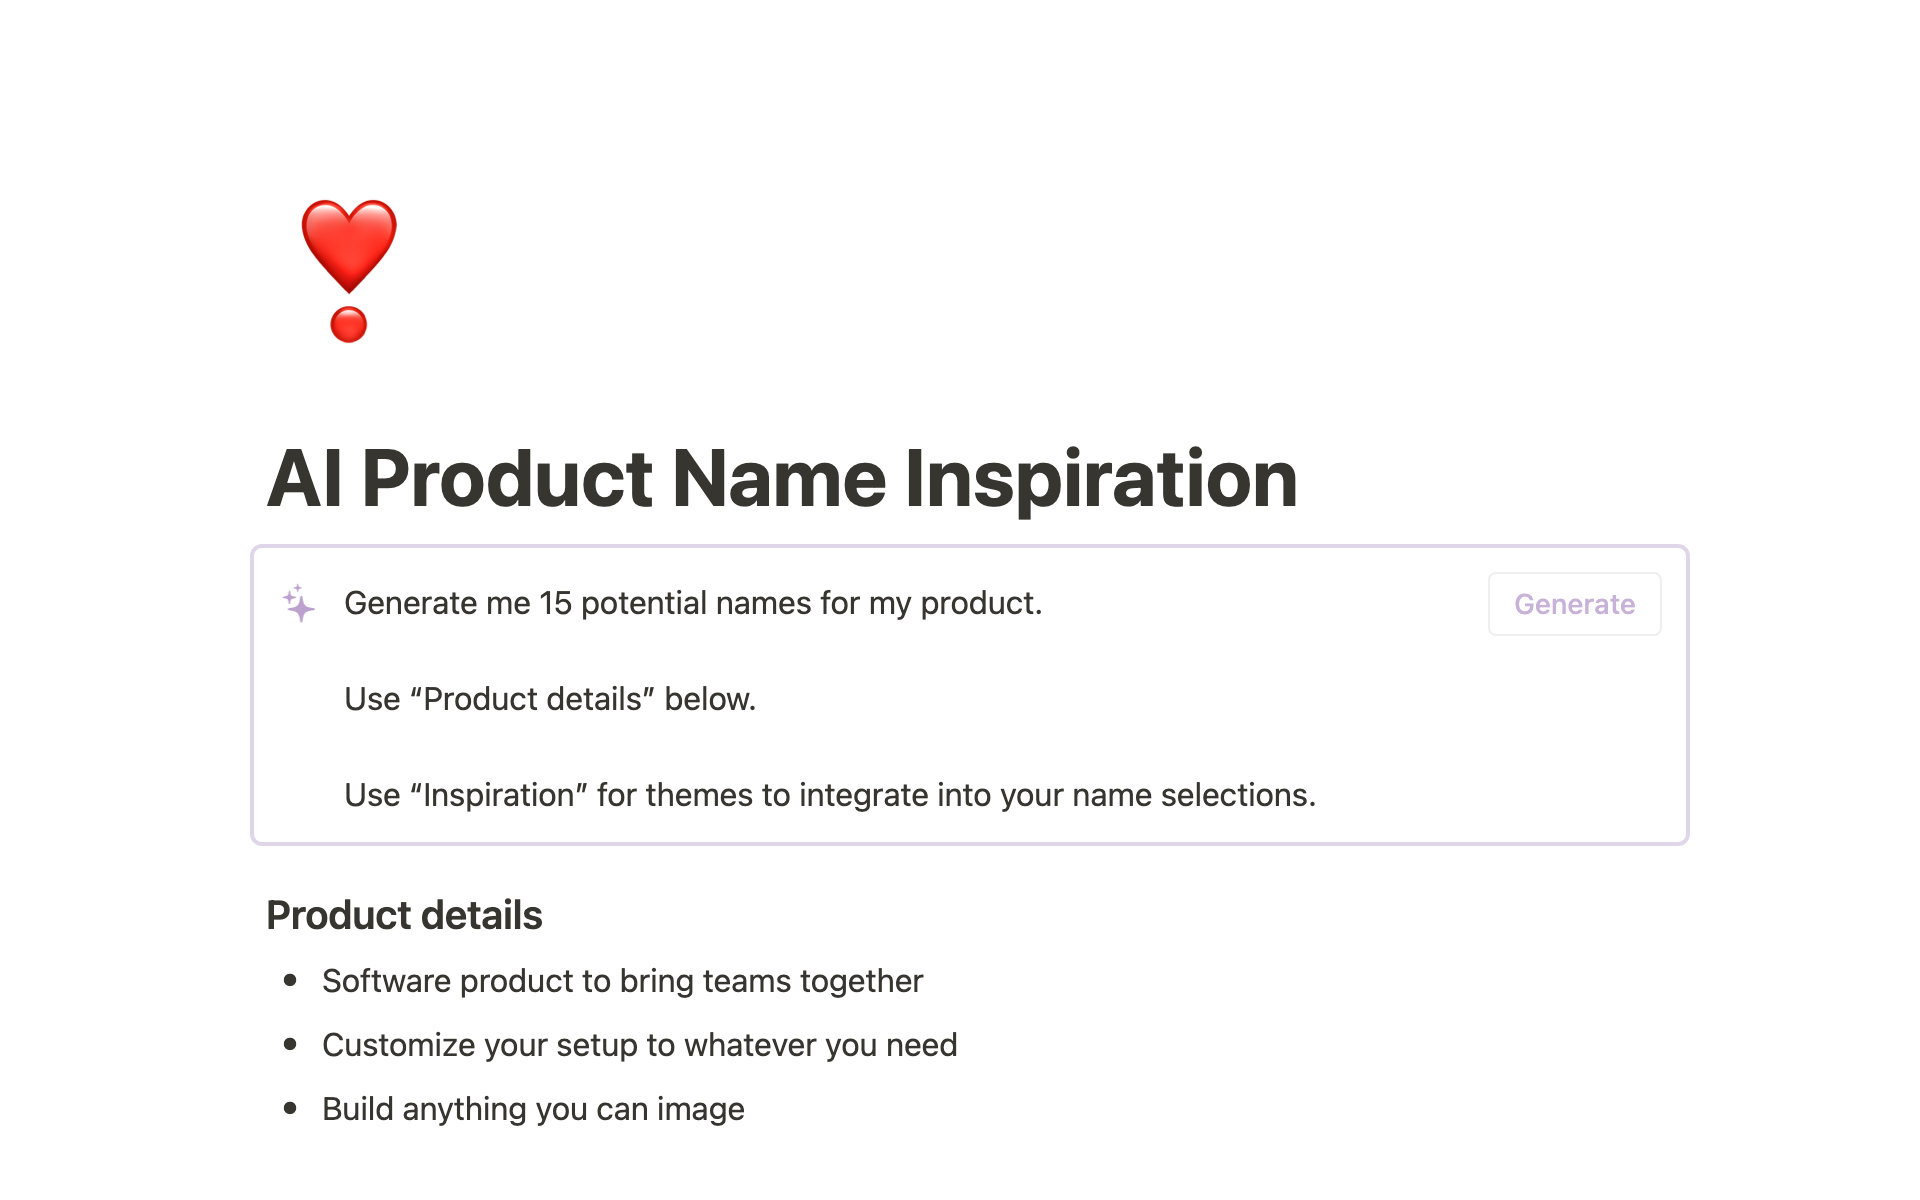 Naming is one of the hardest parts of building anything. Get some inspiration from AI.